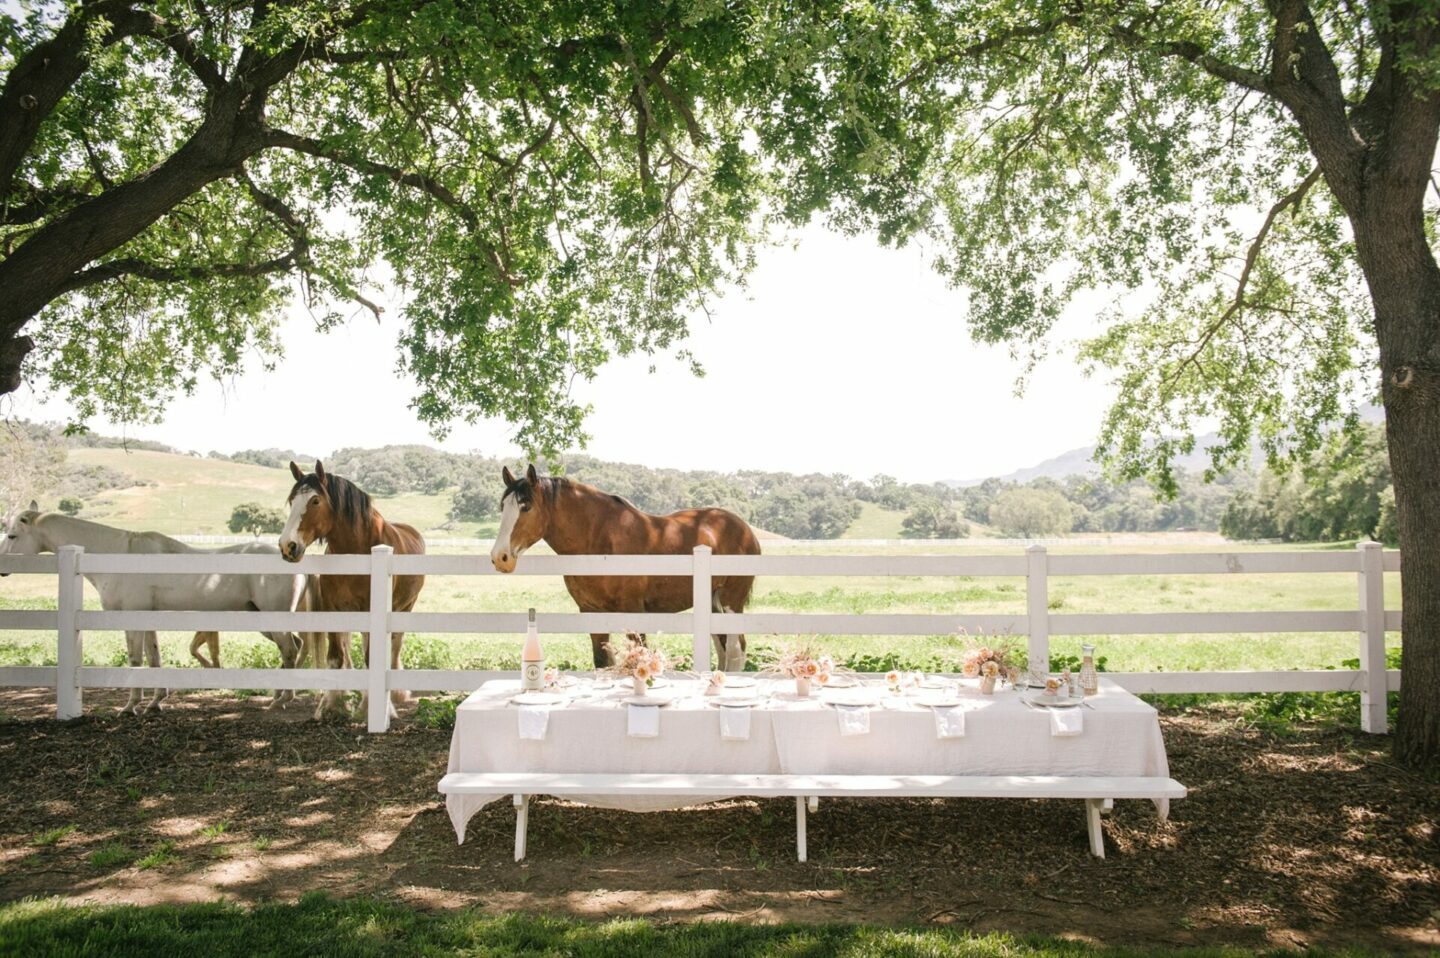 Horses behind a fence and a table set for a wine tasting